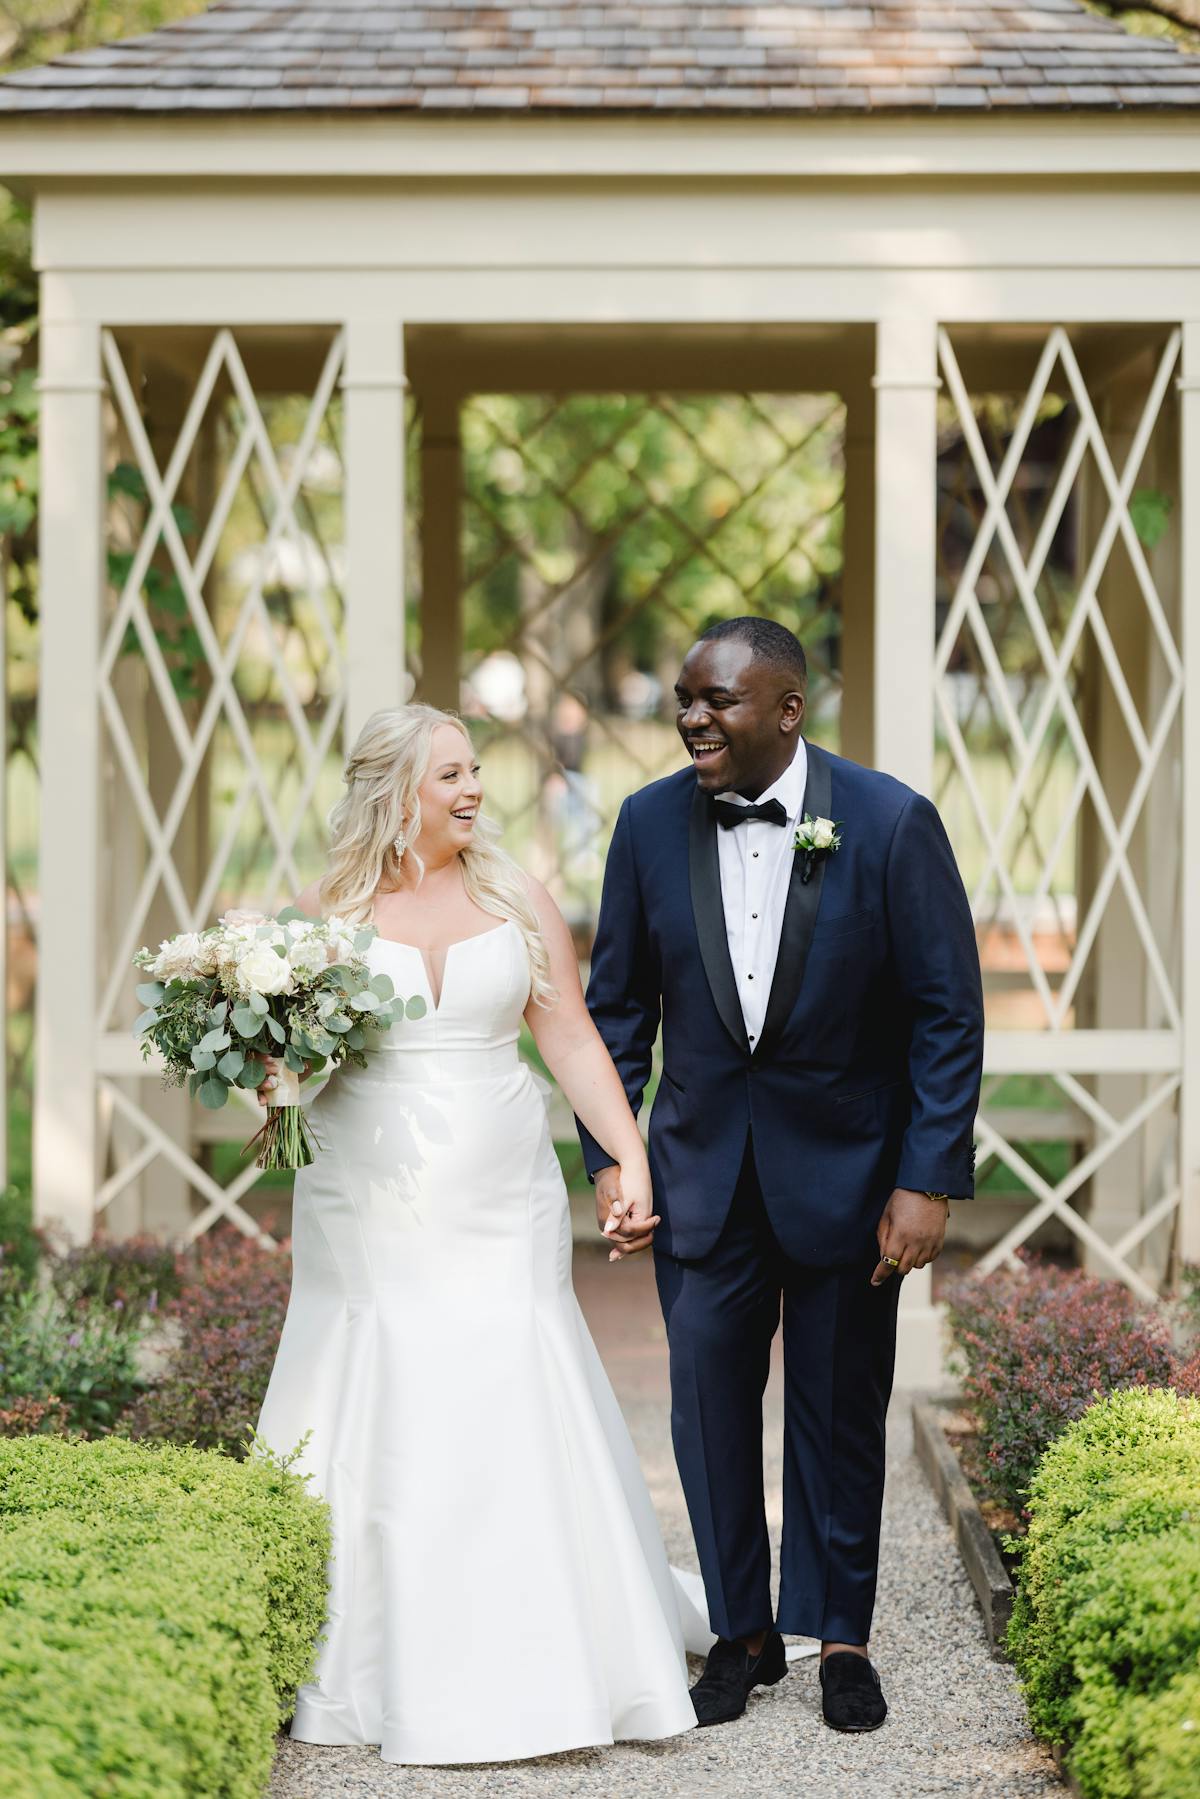 Bride walking down the aisle with groom in navy tuxedo at farmhouse chic venue as a giving away the bride alternative.